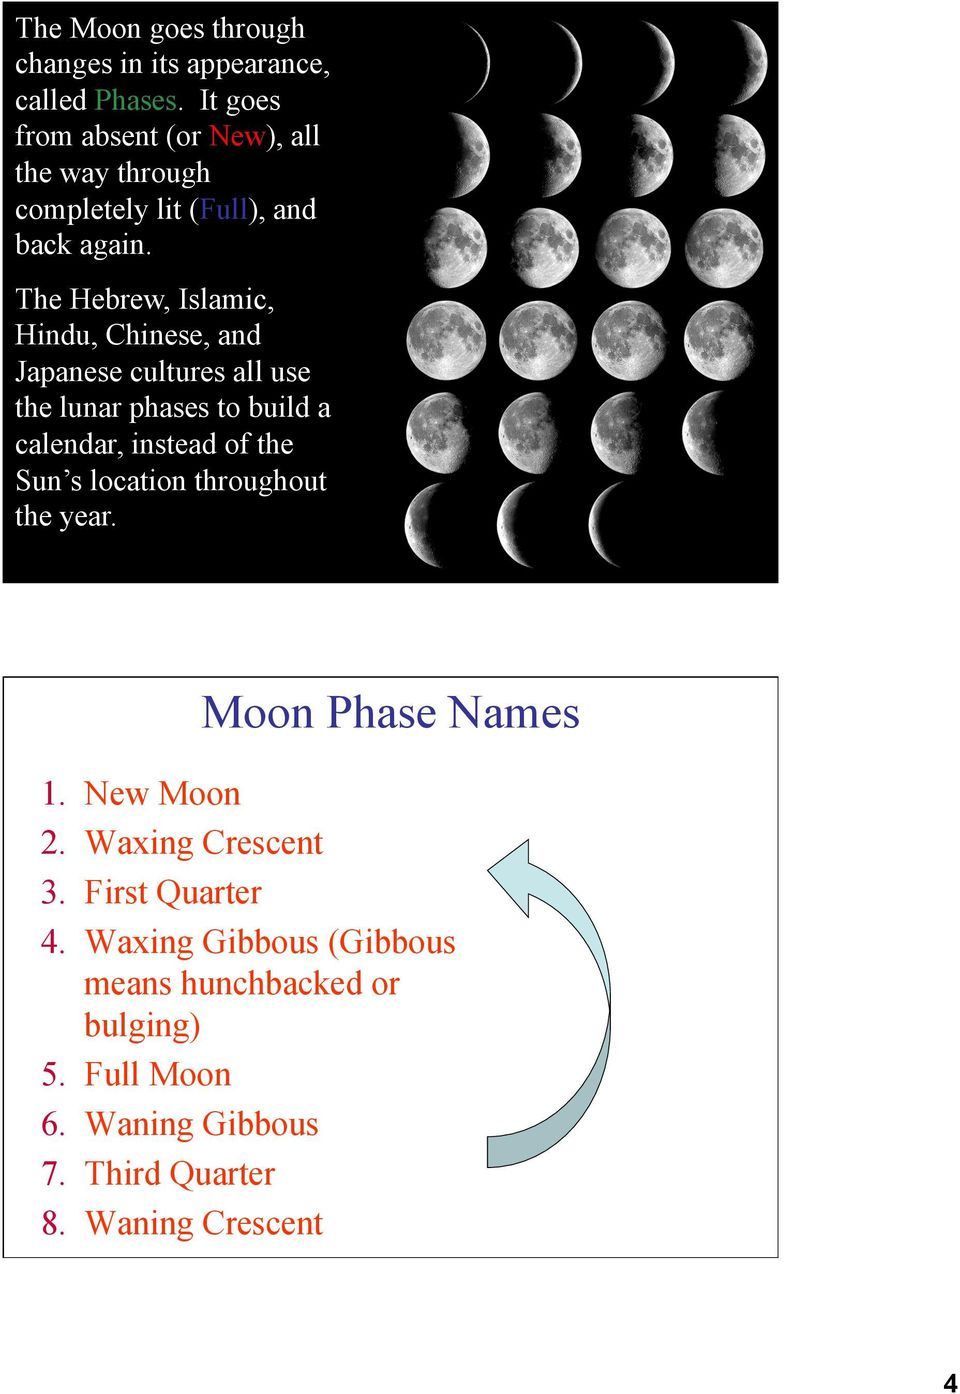 The Hebrew, Islamic, Hindu, Chinese, and Japanese cultures all use the lunar phases to build a calendar, instead of the Sun